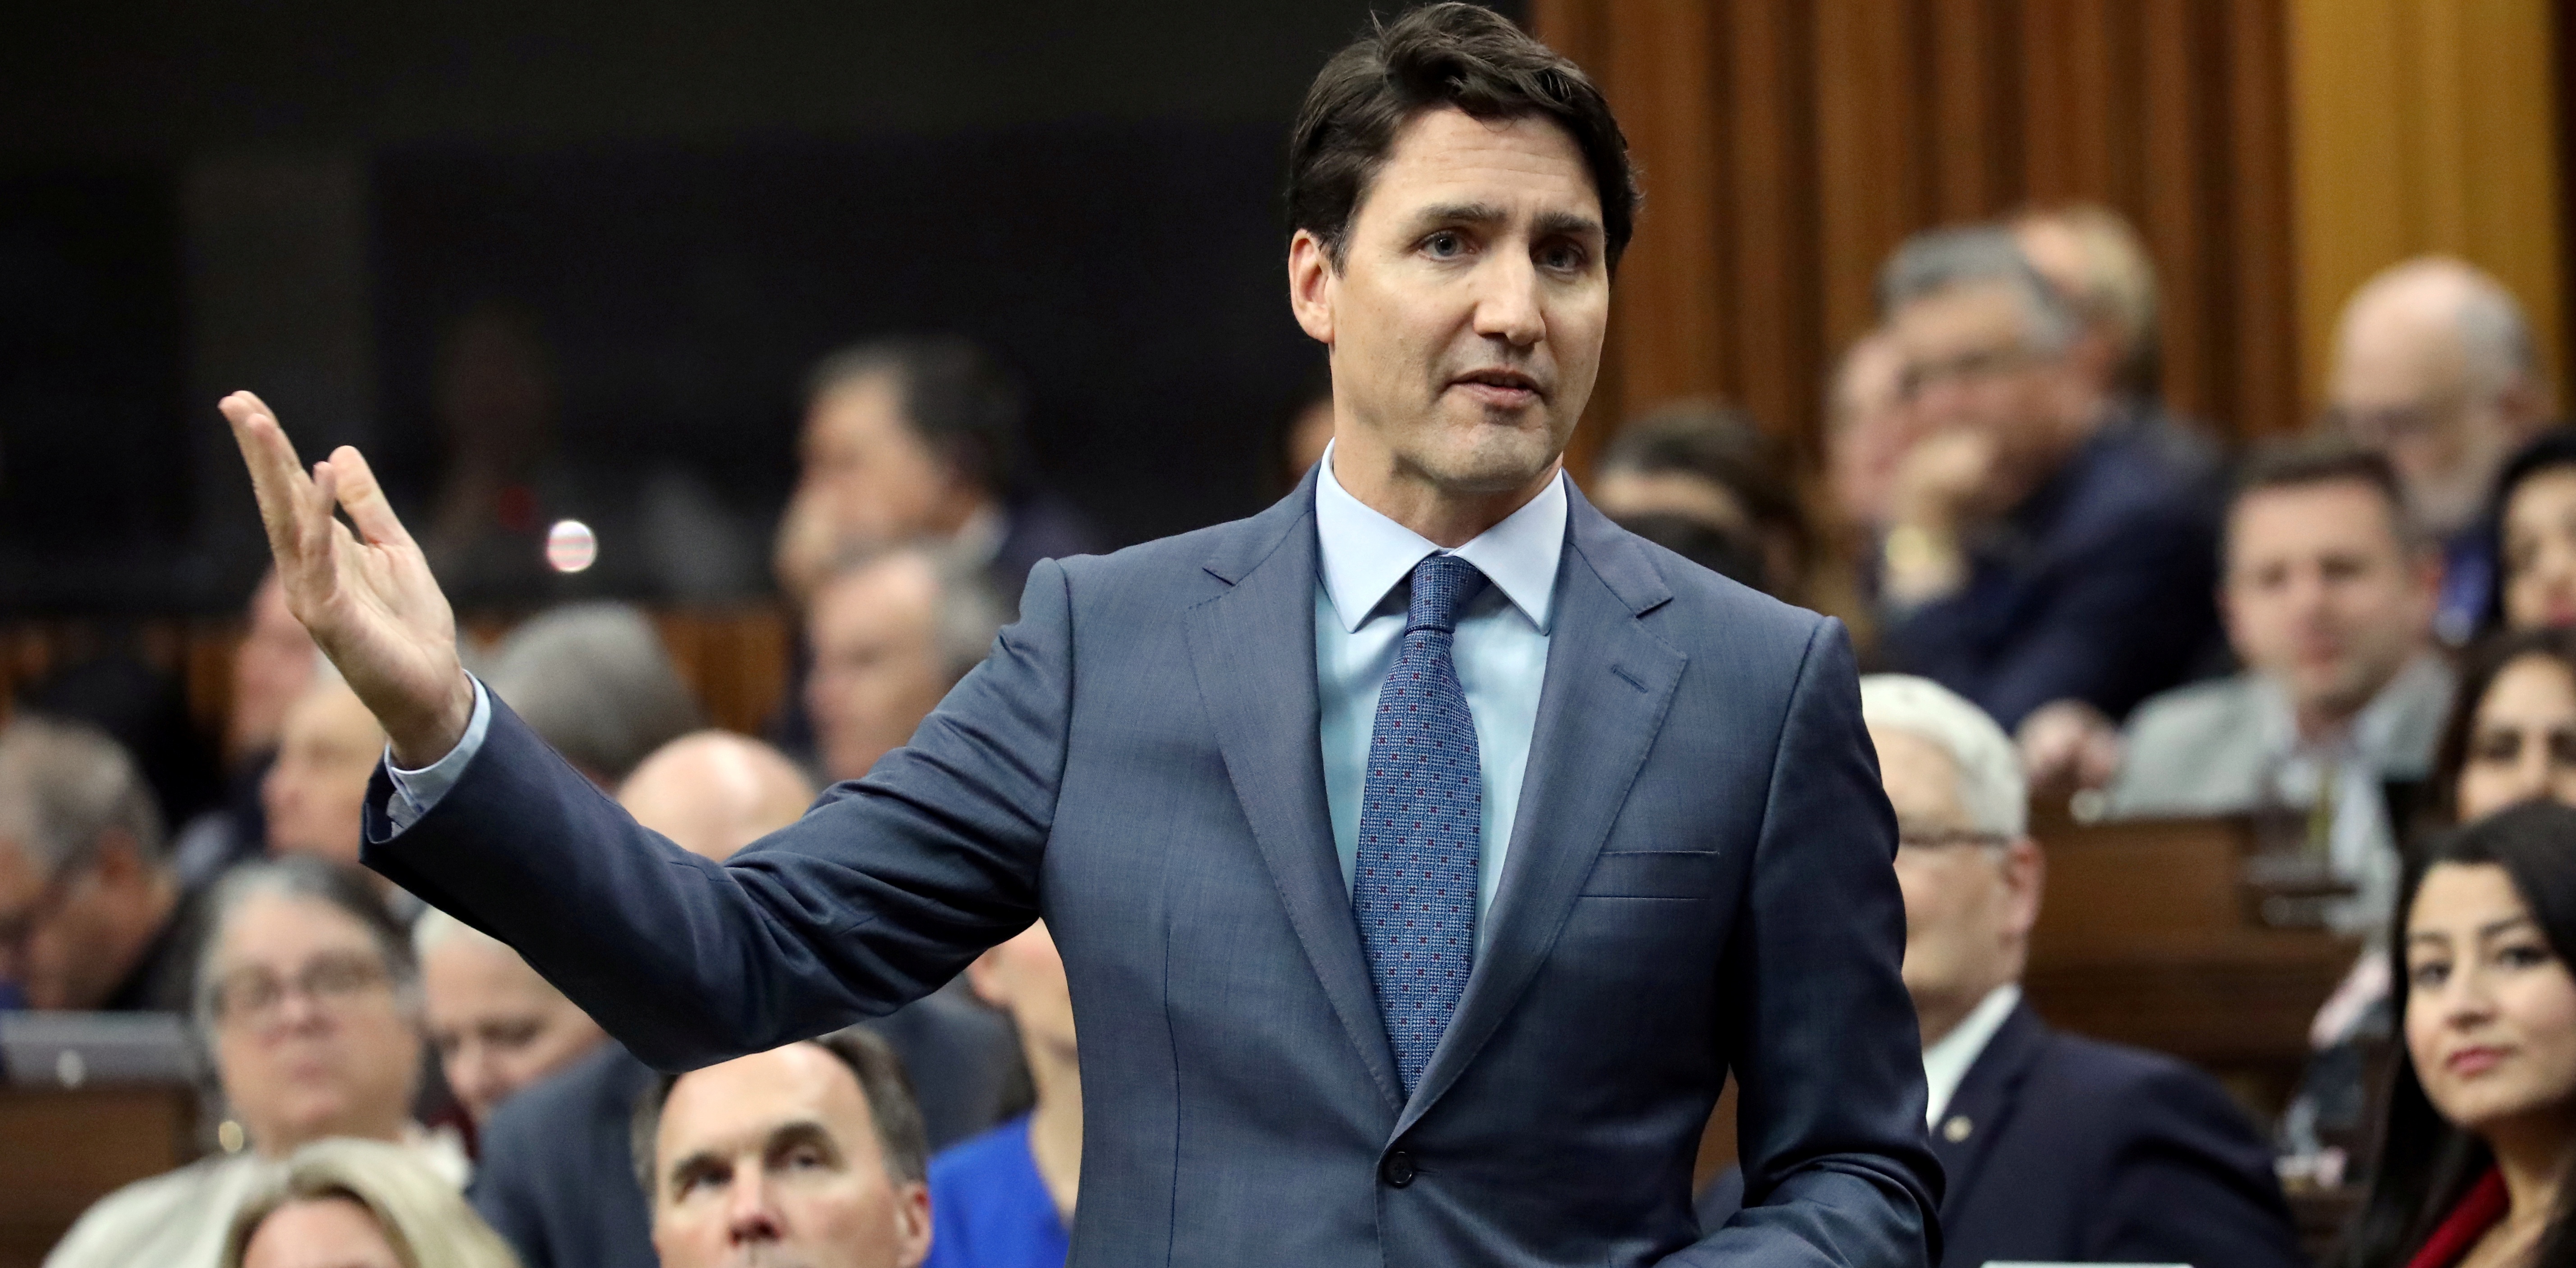 FILE PHOTO: Canada's Prime Minister Justin Trudeau speaks during Question Period in the House of Commons on Parliament Hill in Ottawa, Ontario, Canada, April 3, 2019. REUTERS/Chris Wattie/File Photo